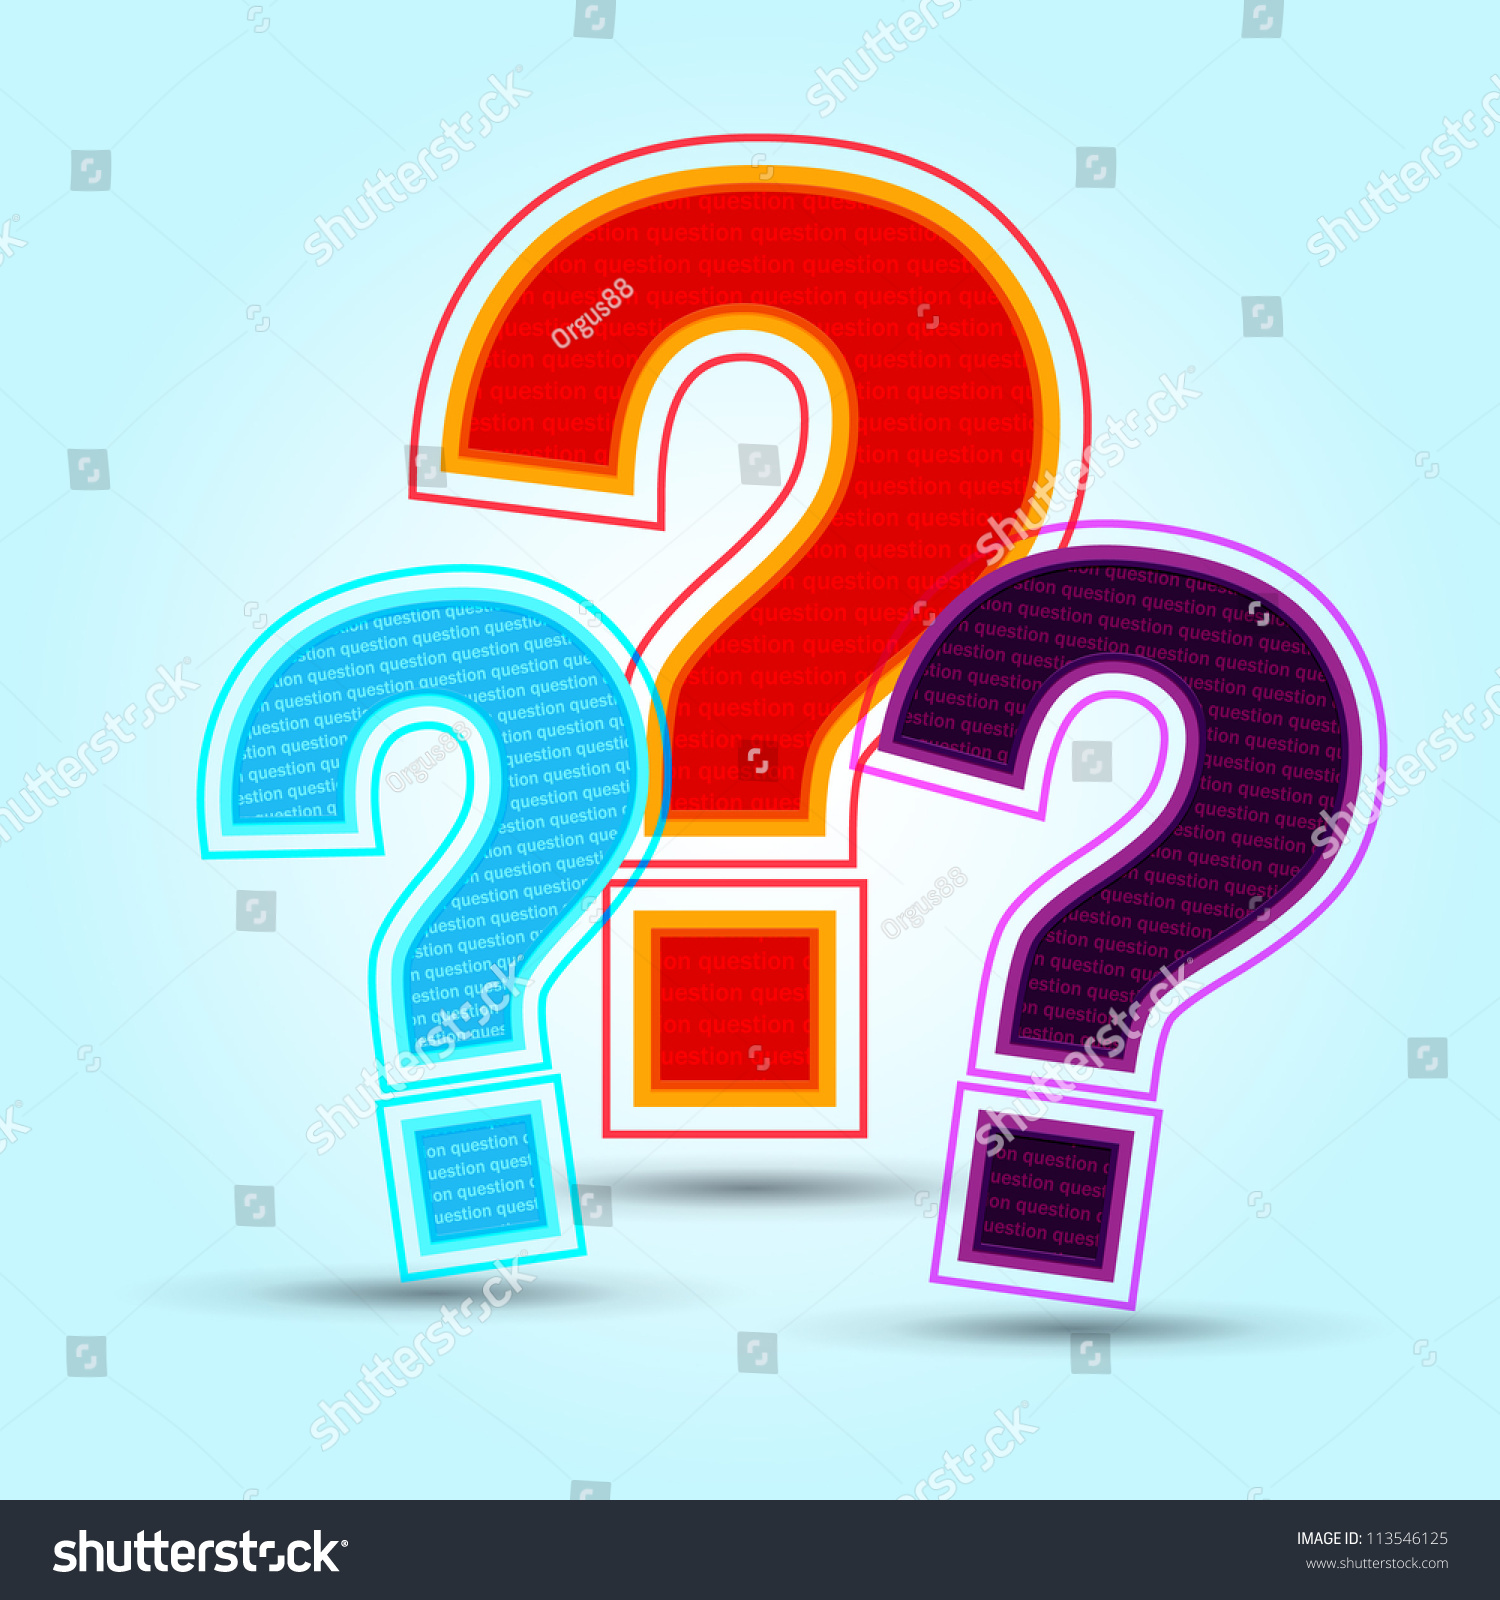 Abstract Colorful Question Mark Stock Vector Illustration 113546125 Shutterstock 7209